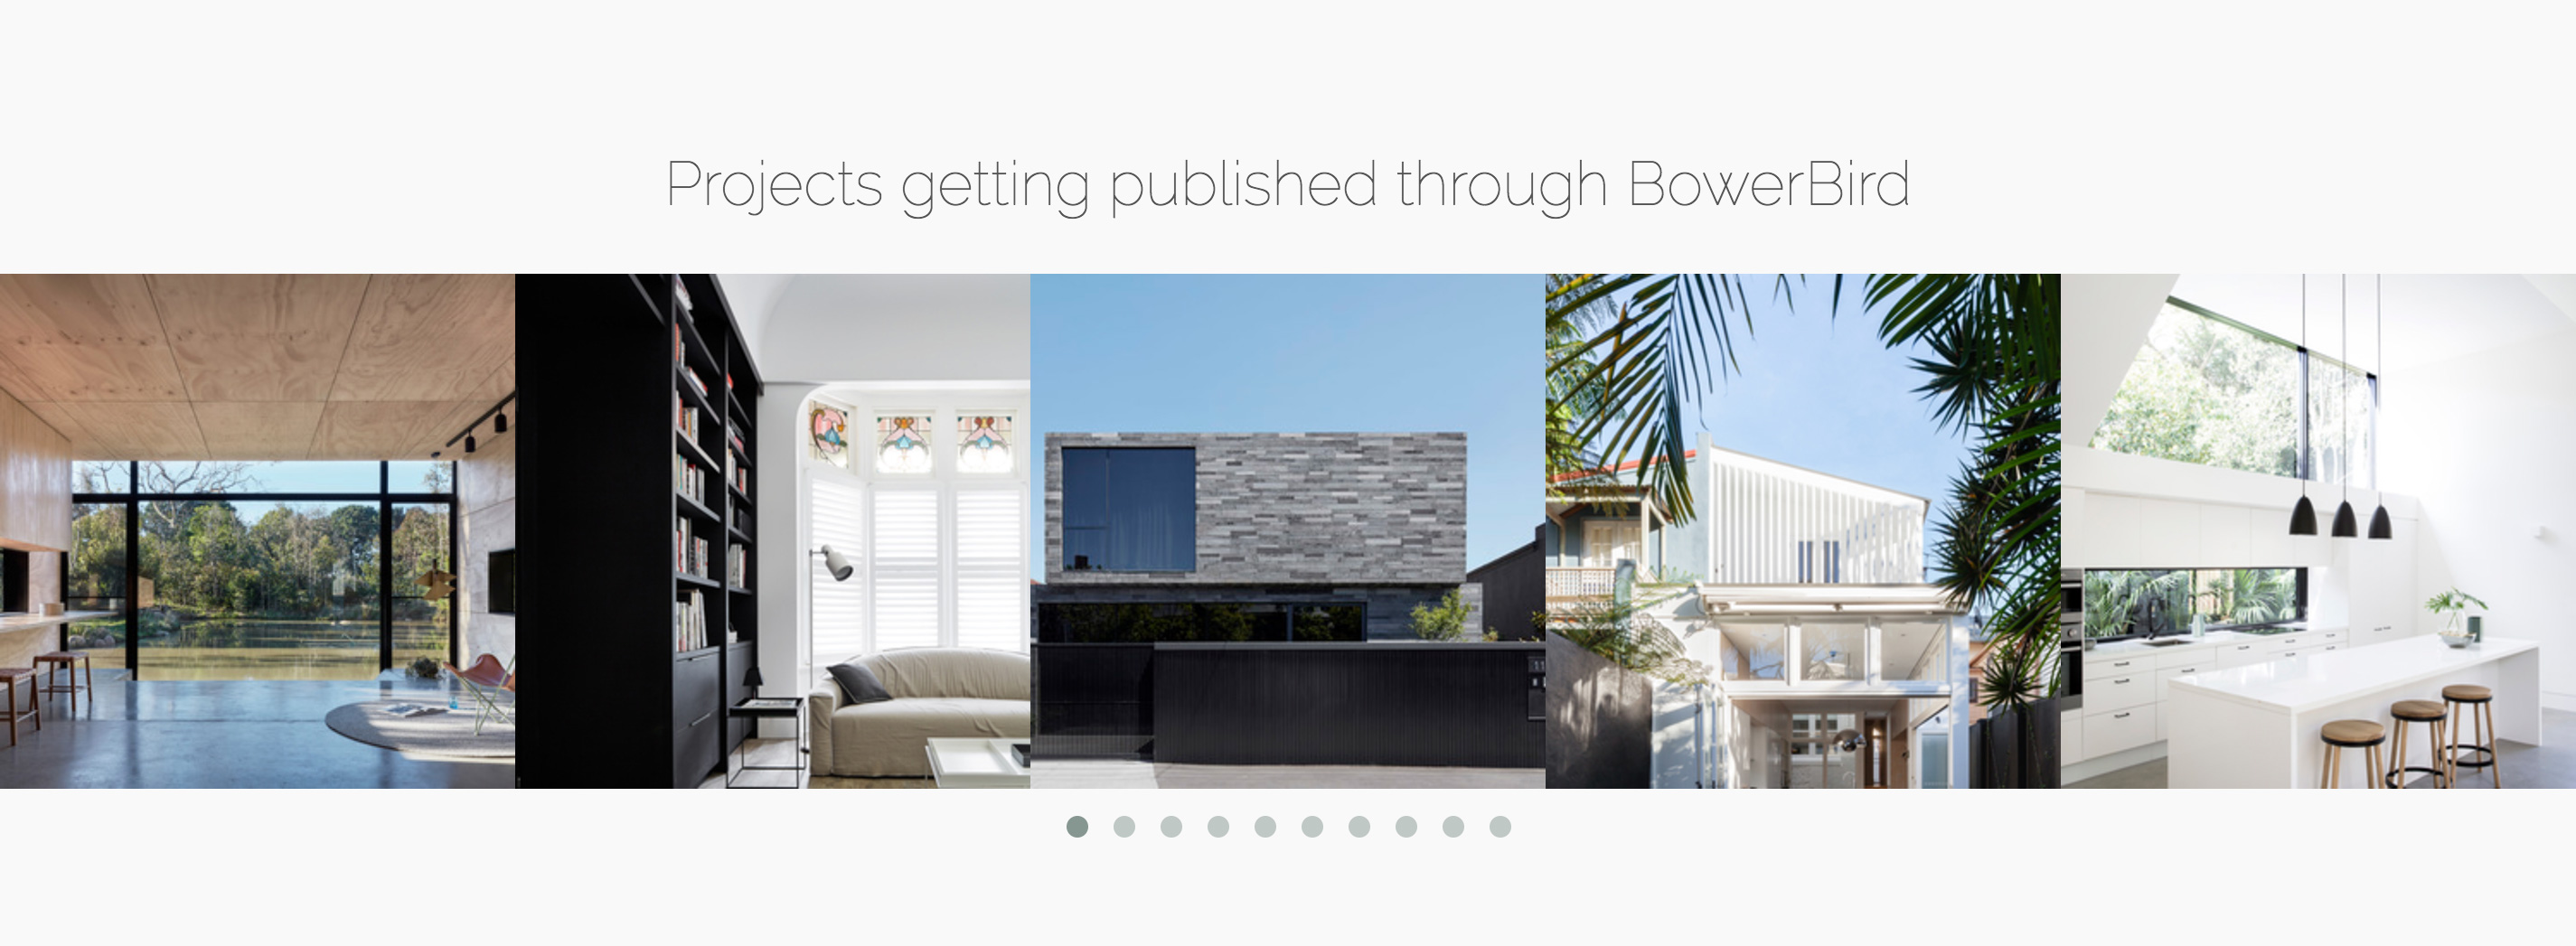 projects-getting-published_bowerbird